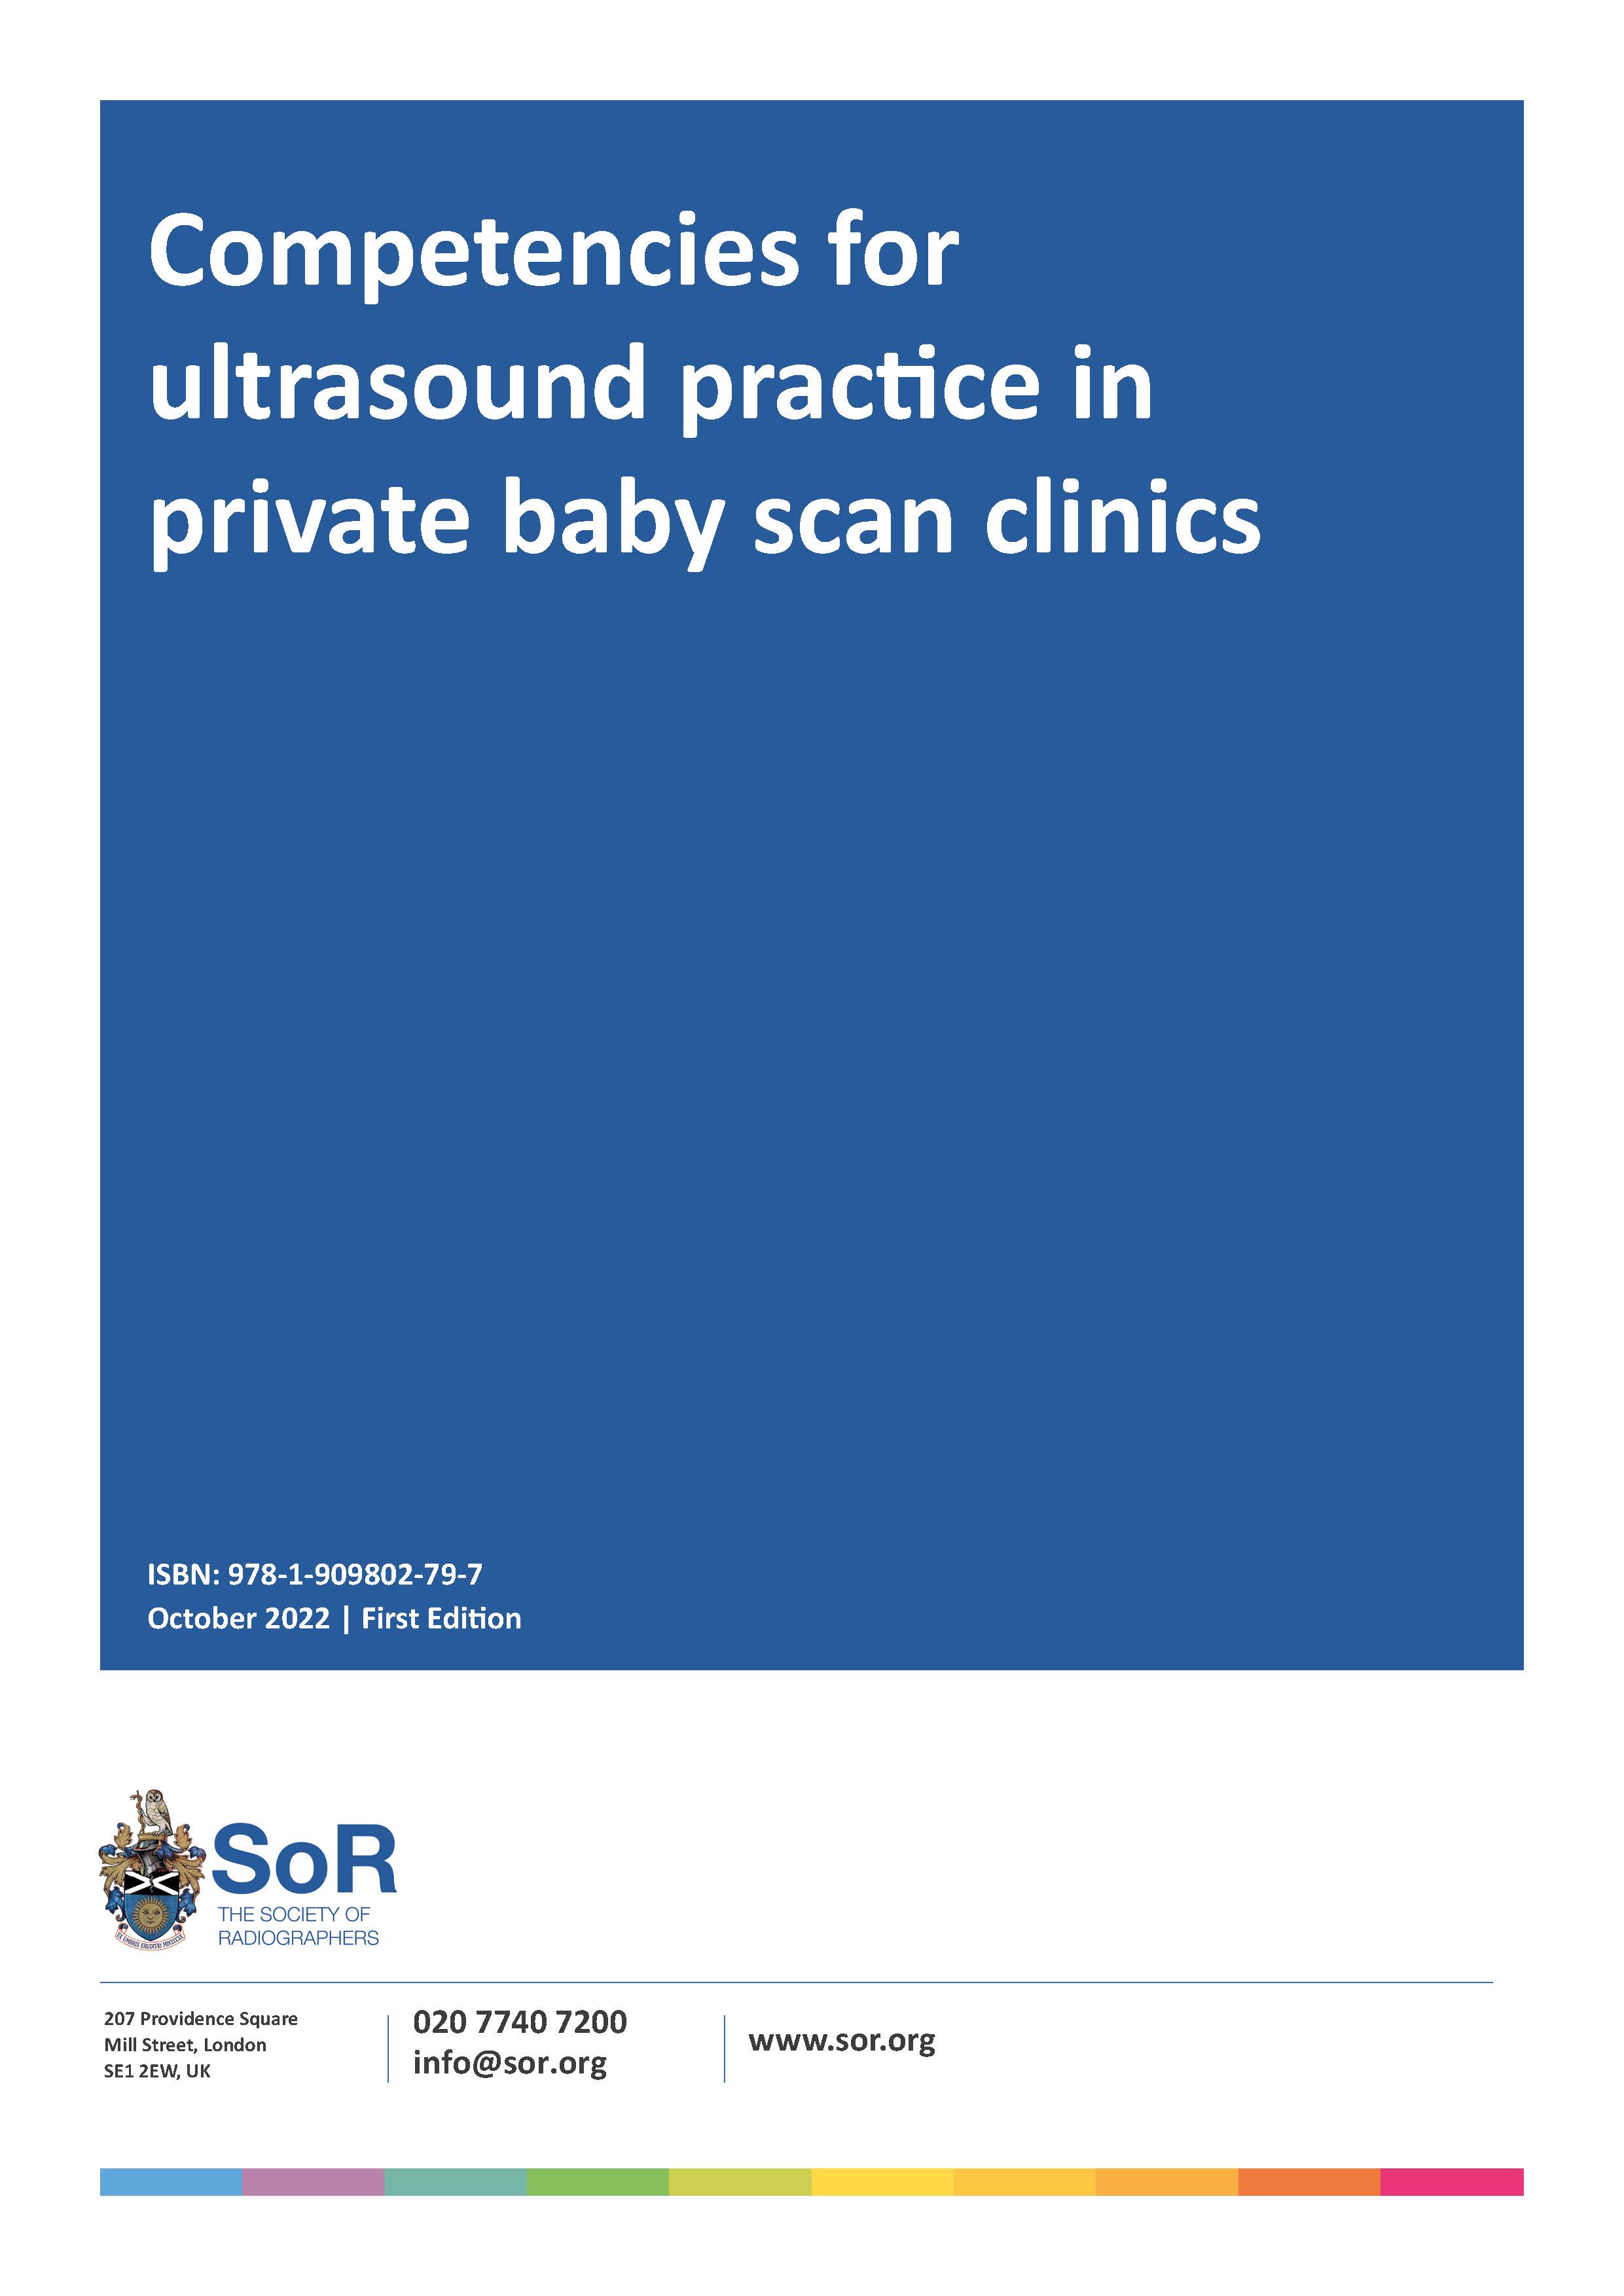 Competencies for ultrasound practice in private baby scan clinics